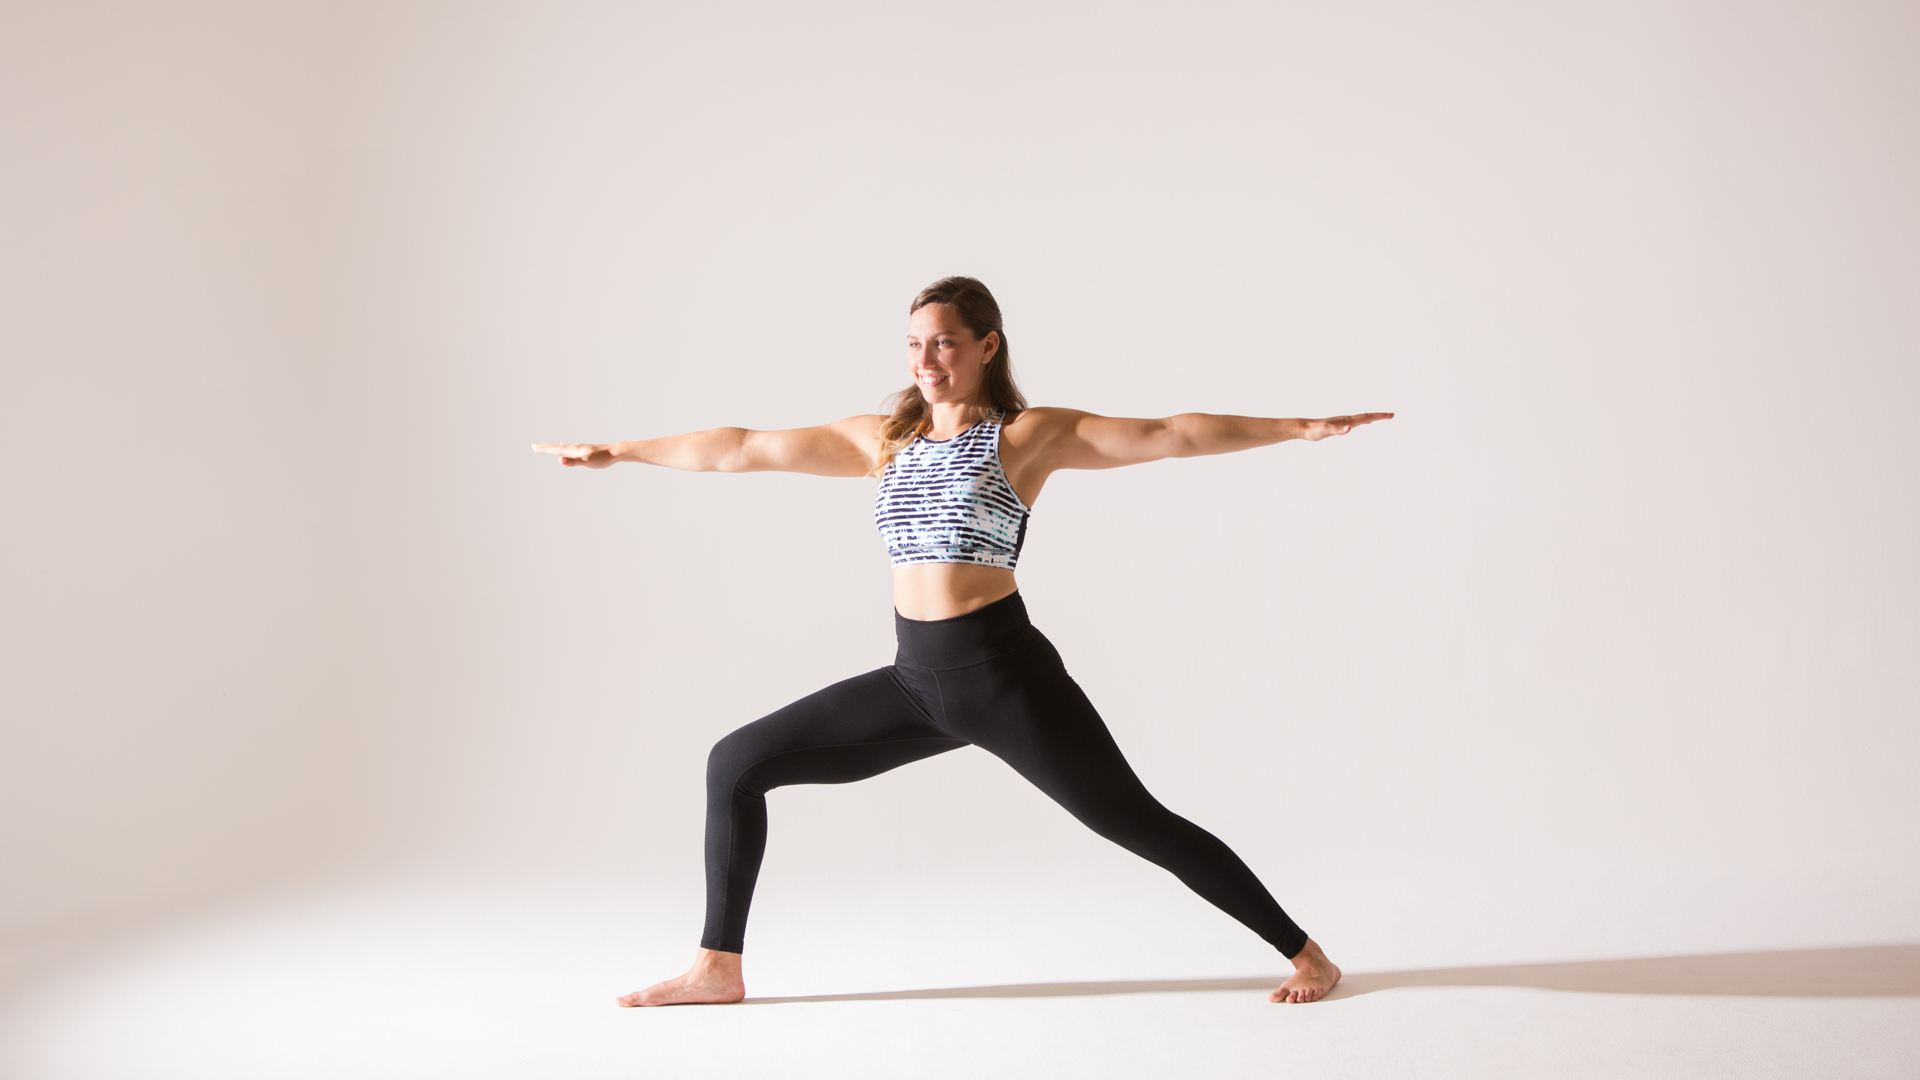 Warrior poses: Types and how to do it | HealthShots